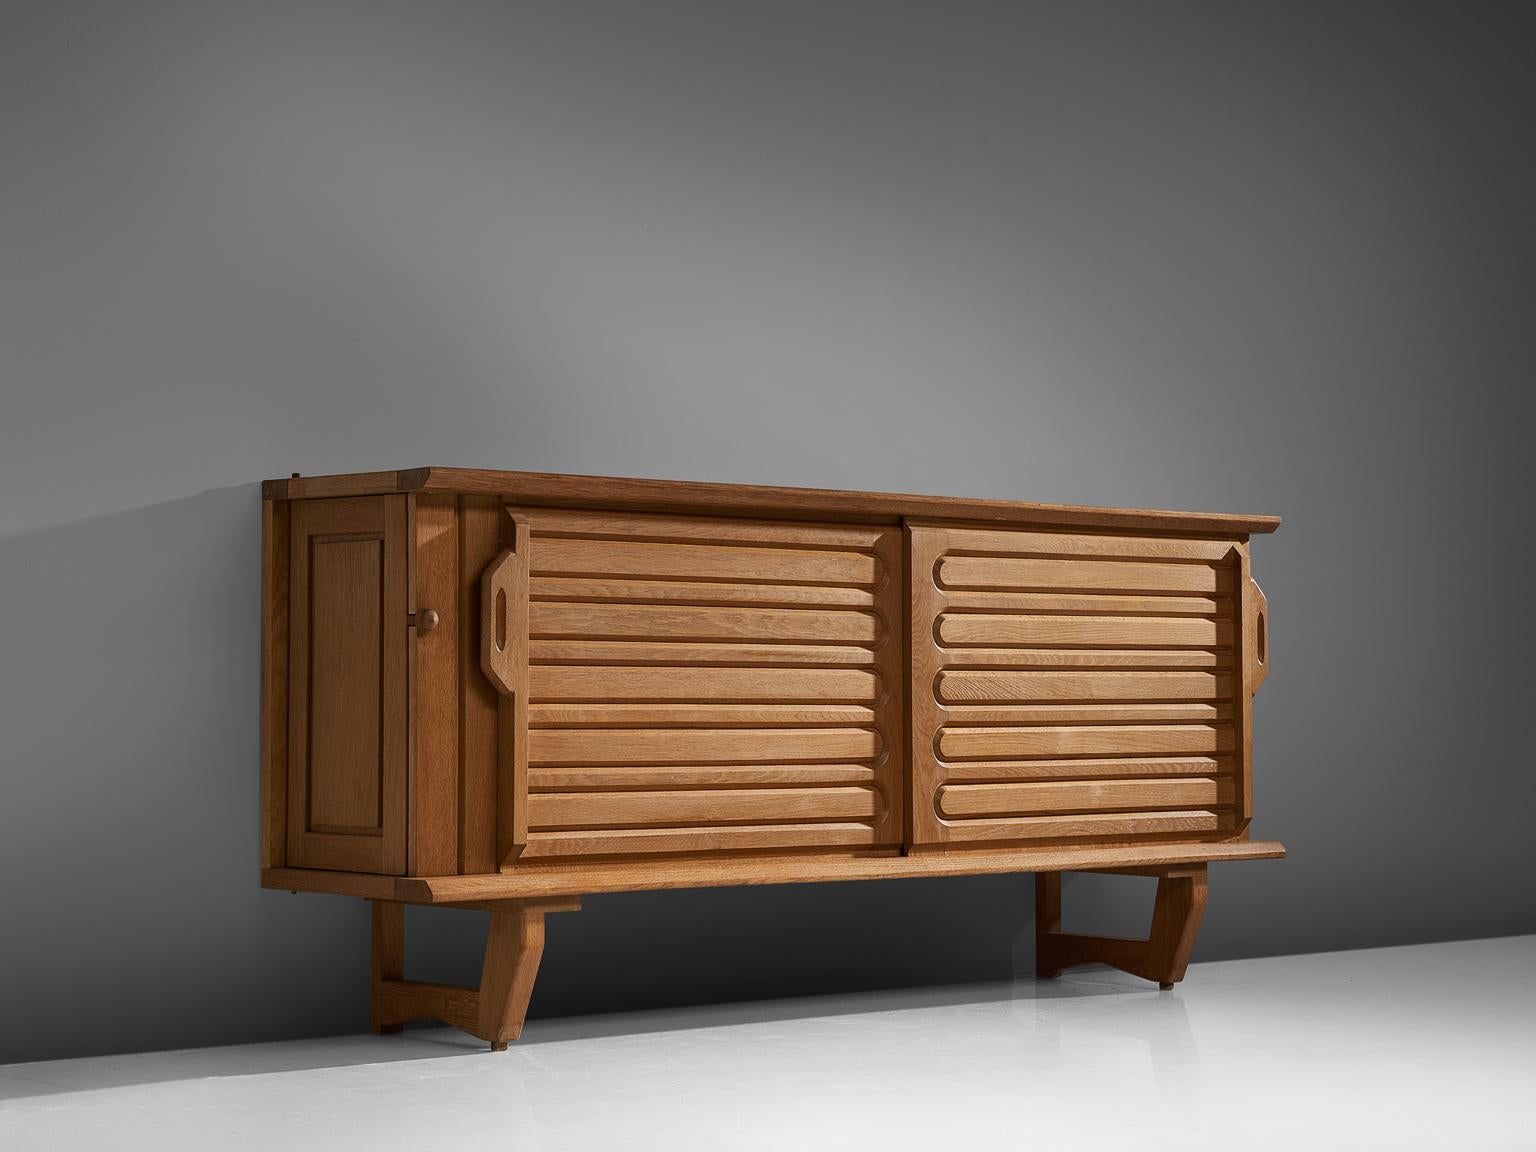 Robert Guillerme and Jacque Chambron, sideboard, oak and ceramics, France, 1960s.

This well proportioned sideboard is designed by Guillerme and Chambron and features horizontal engravings in the front sliding doors. On the sides, the cabinet